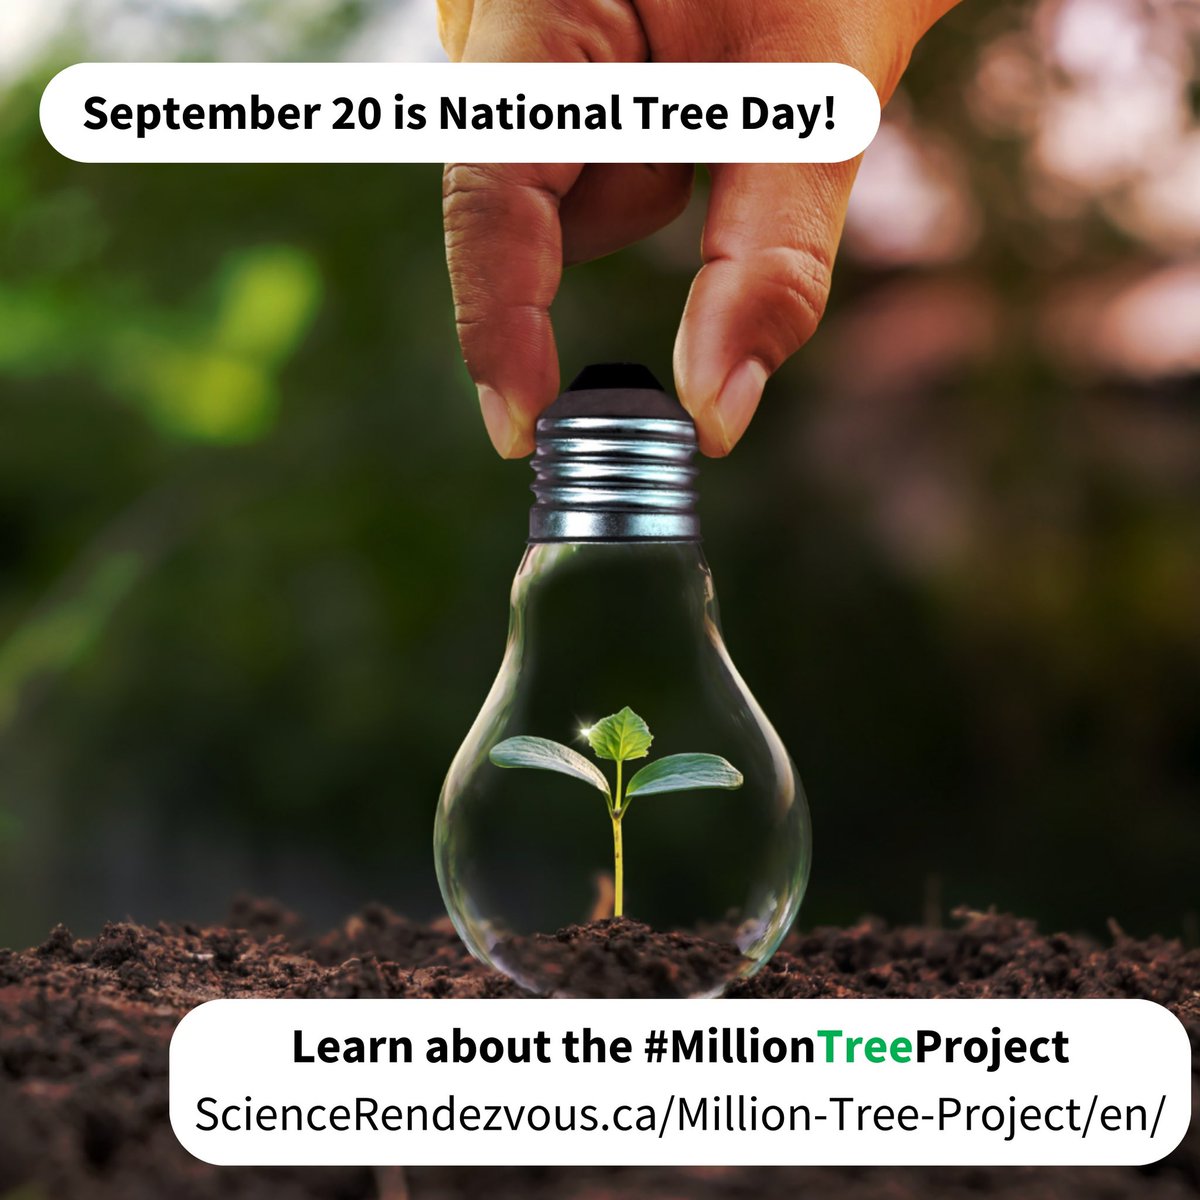 2. Wednesday is #NationalTreeDay! Learn about the #MillionTreeProject at ScienceRendezvous.ca/Million-Tree-P…